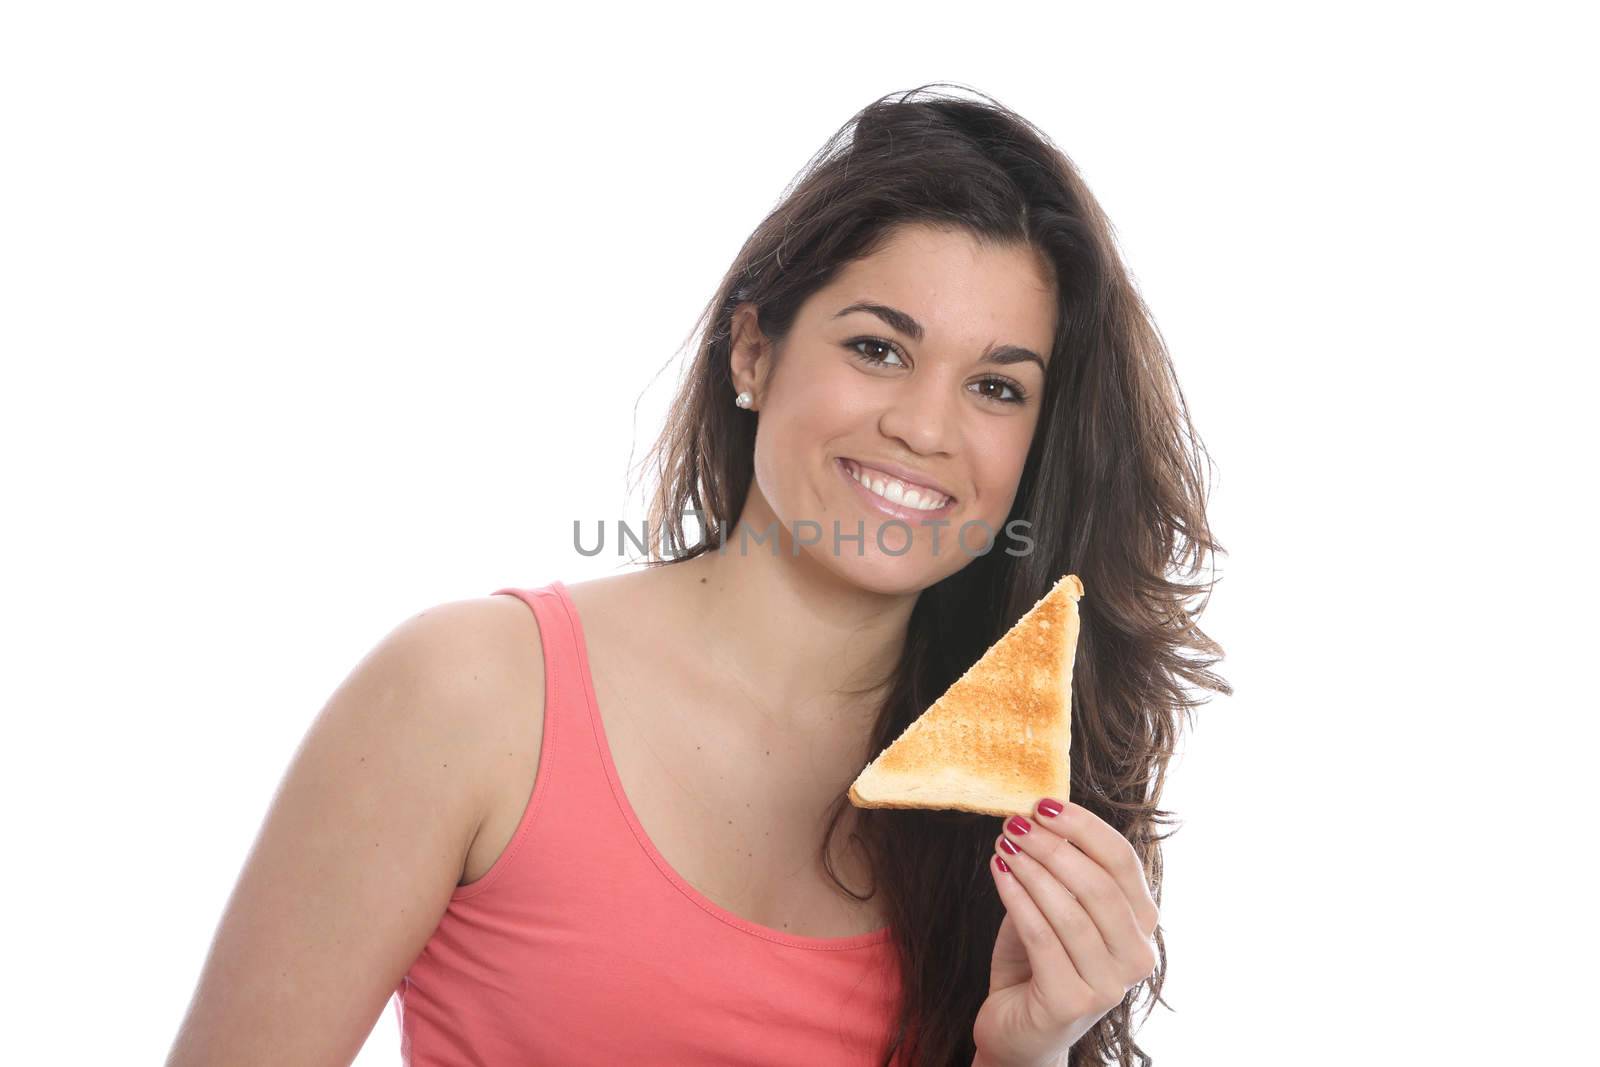 Model Released. Young Woman Eating a Slice of Toast